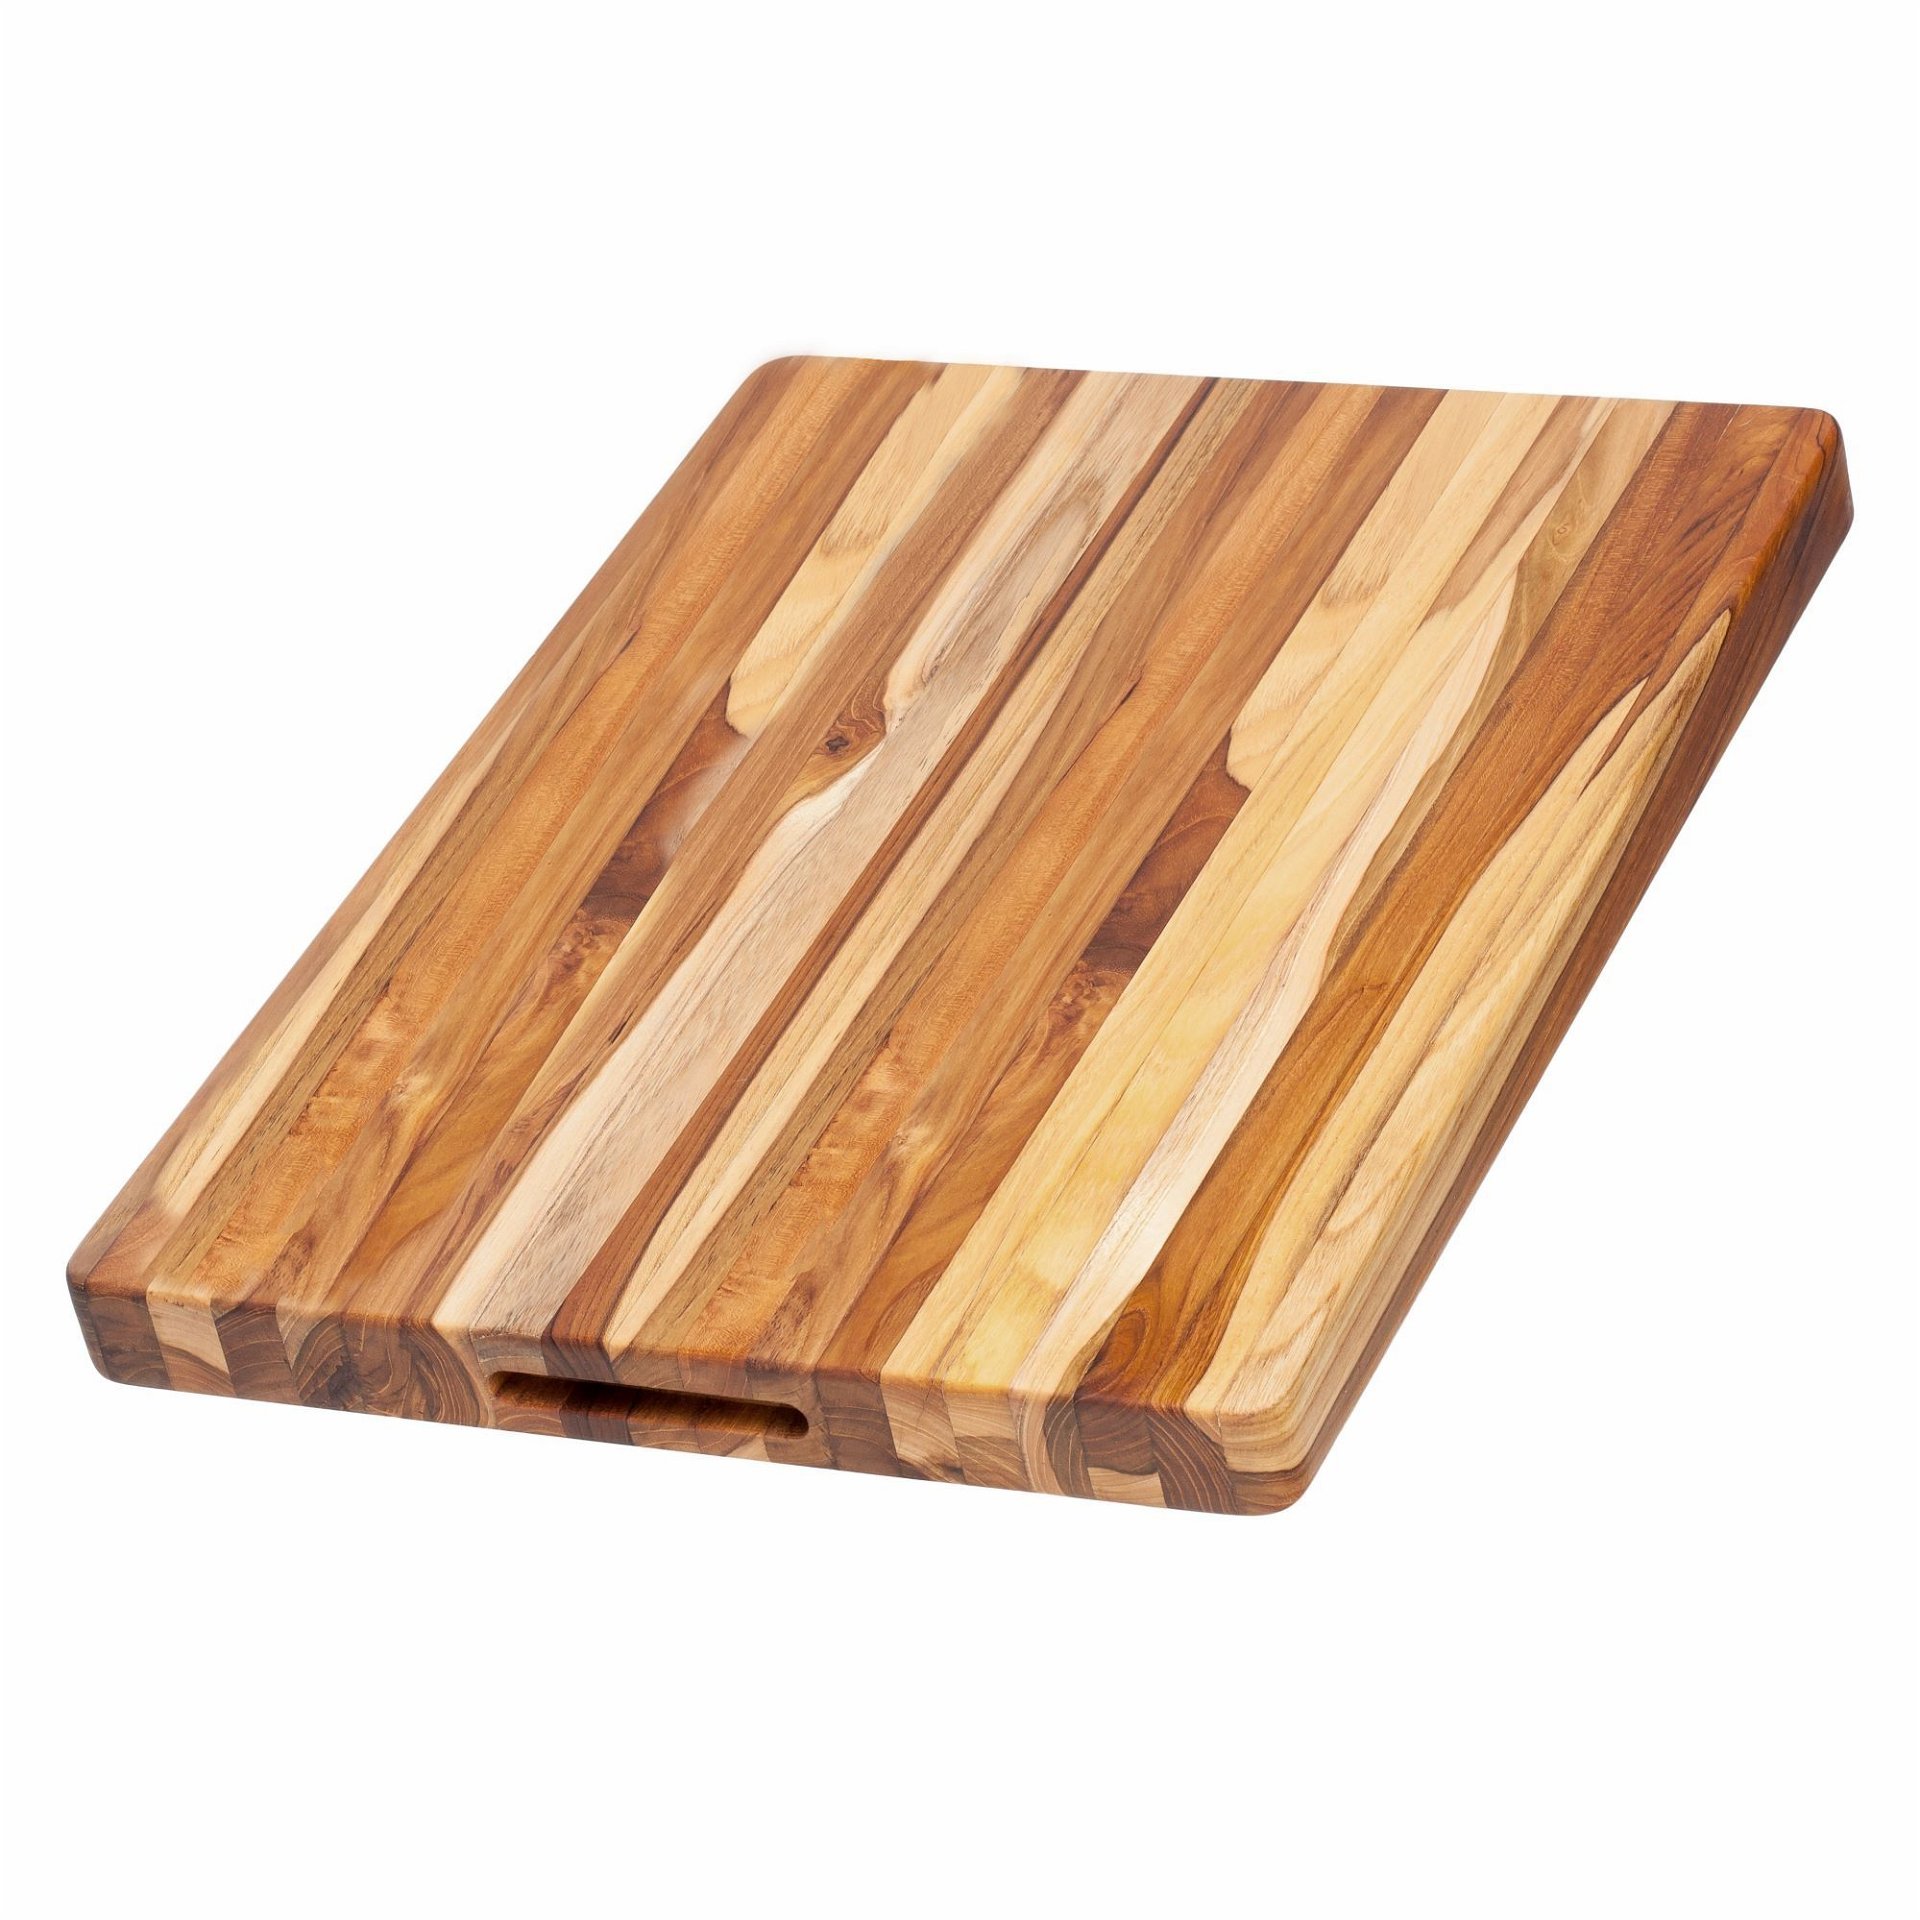 20-Inch by 15-Inch by 1.5-Inch Proteak 331 Rectangular Chopping Board with Hand Grip Brown by 